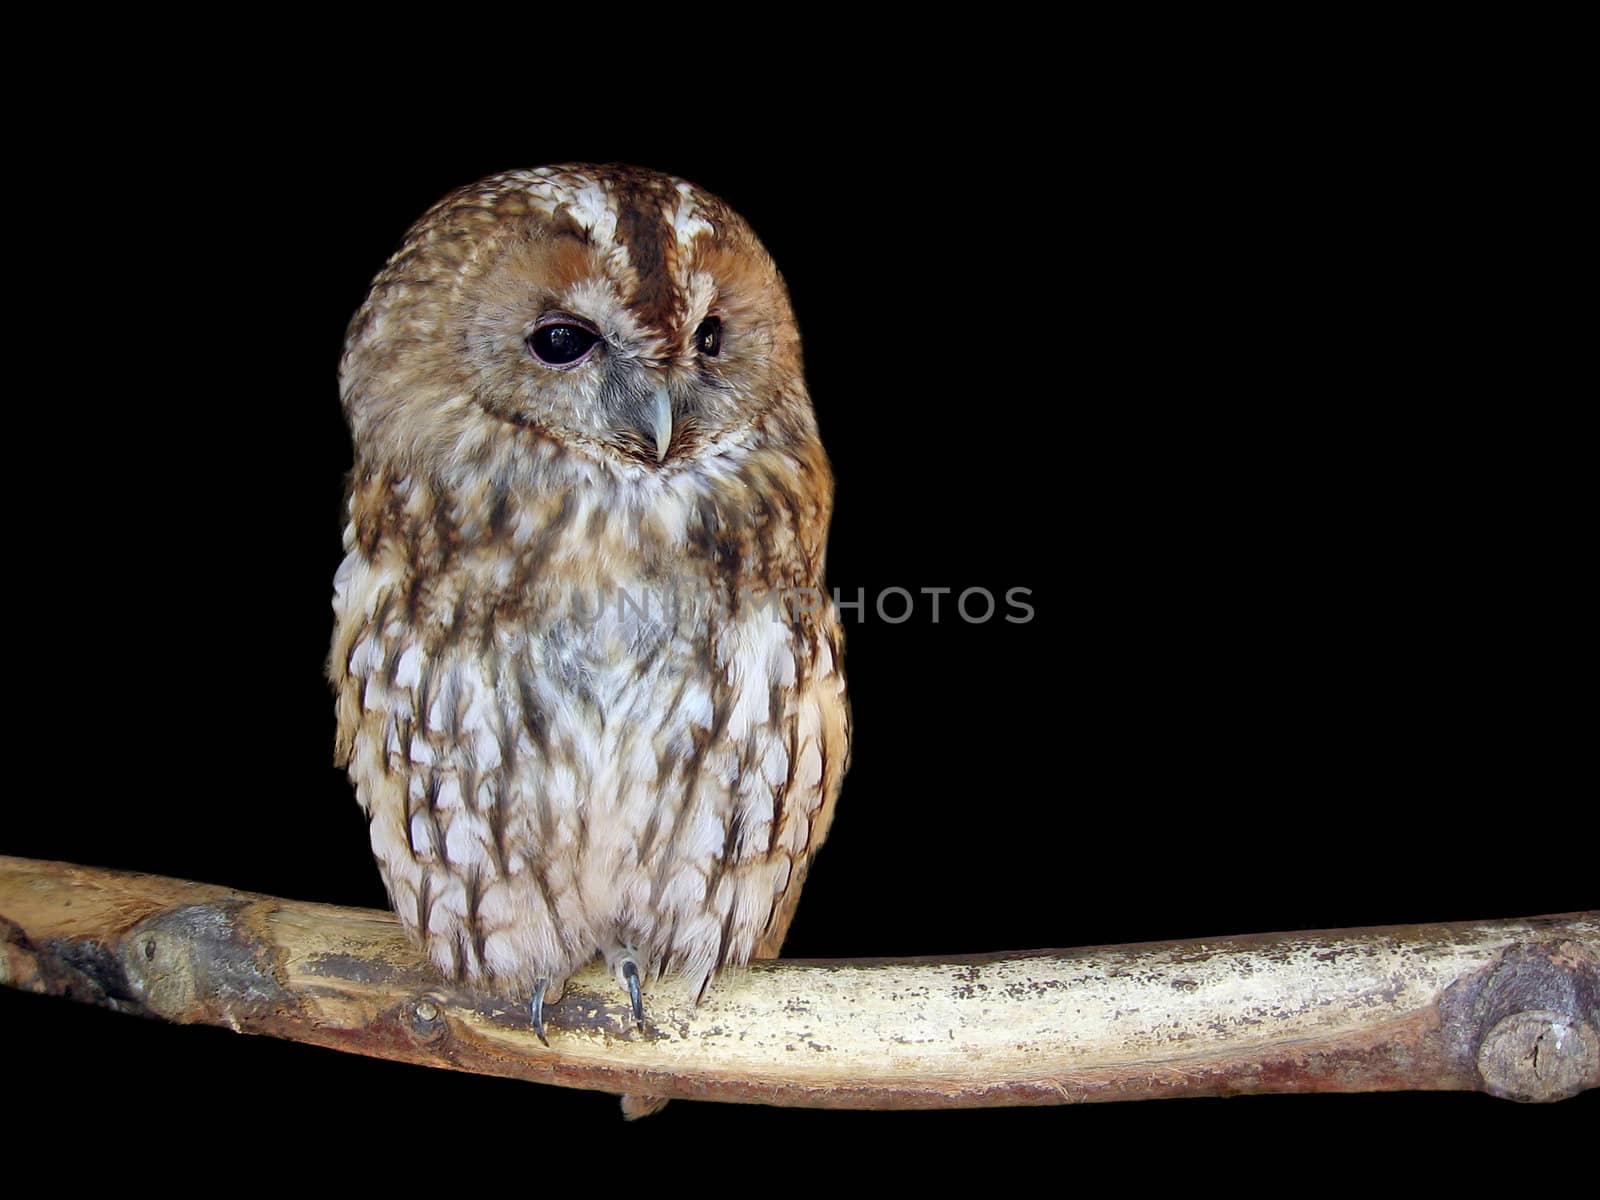 Isolated owl on a deep black background